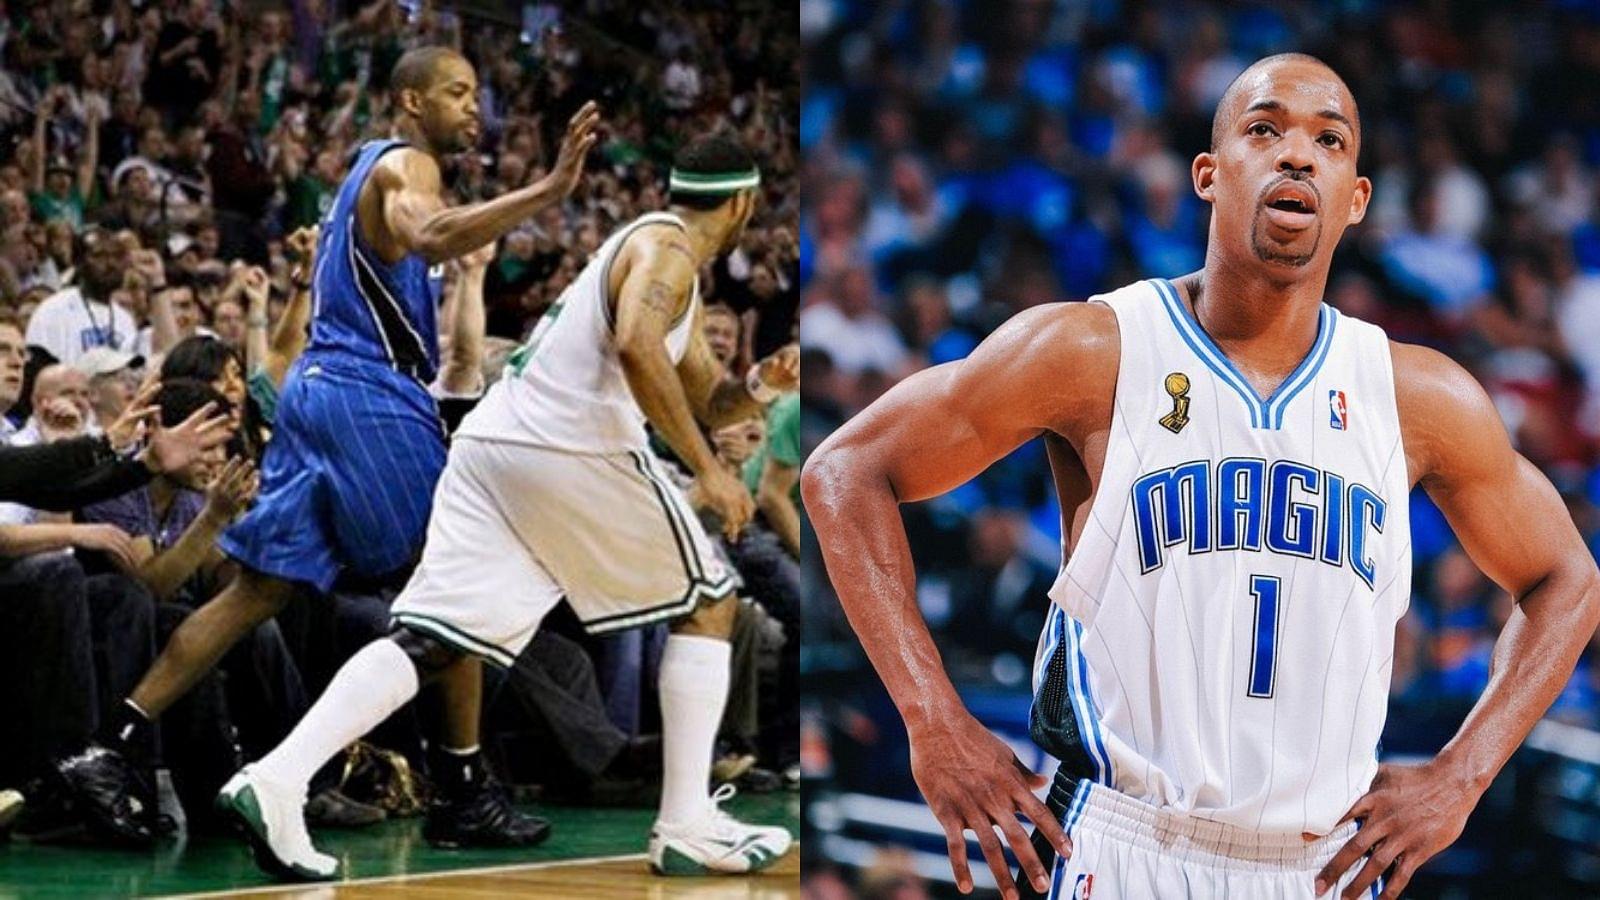 Magic’s Rafer Alston slapped Celtics guard Eddie House in 09’ Conference Semi-finals and realised he “f***ed up and did the dumbest, most craziest thing ever”